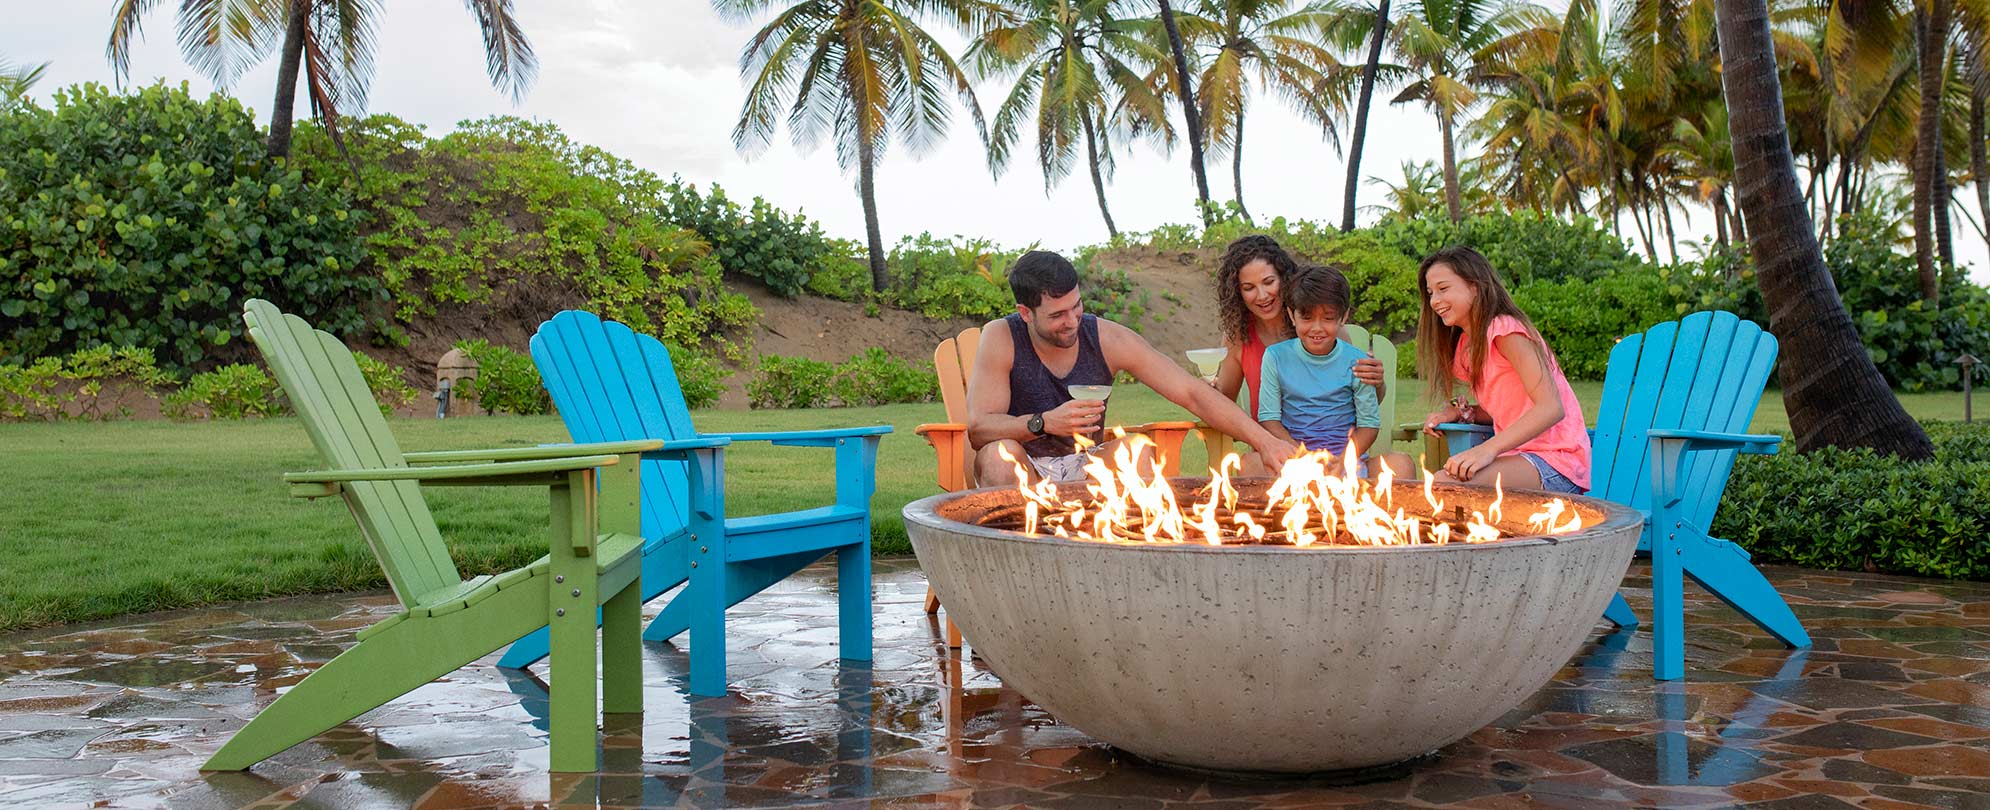 A family sits in adirondack chairs around a large round, stone firepit at a Margaritaville Vacation Club resort.